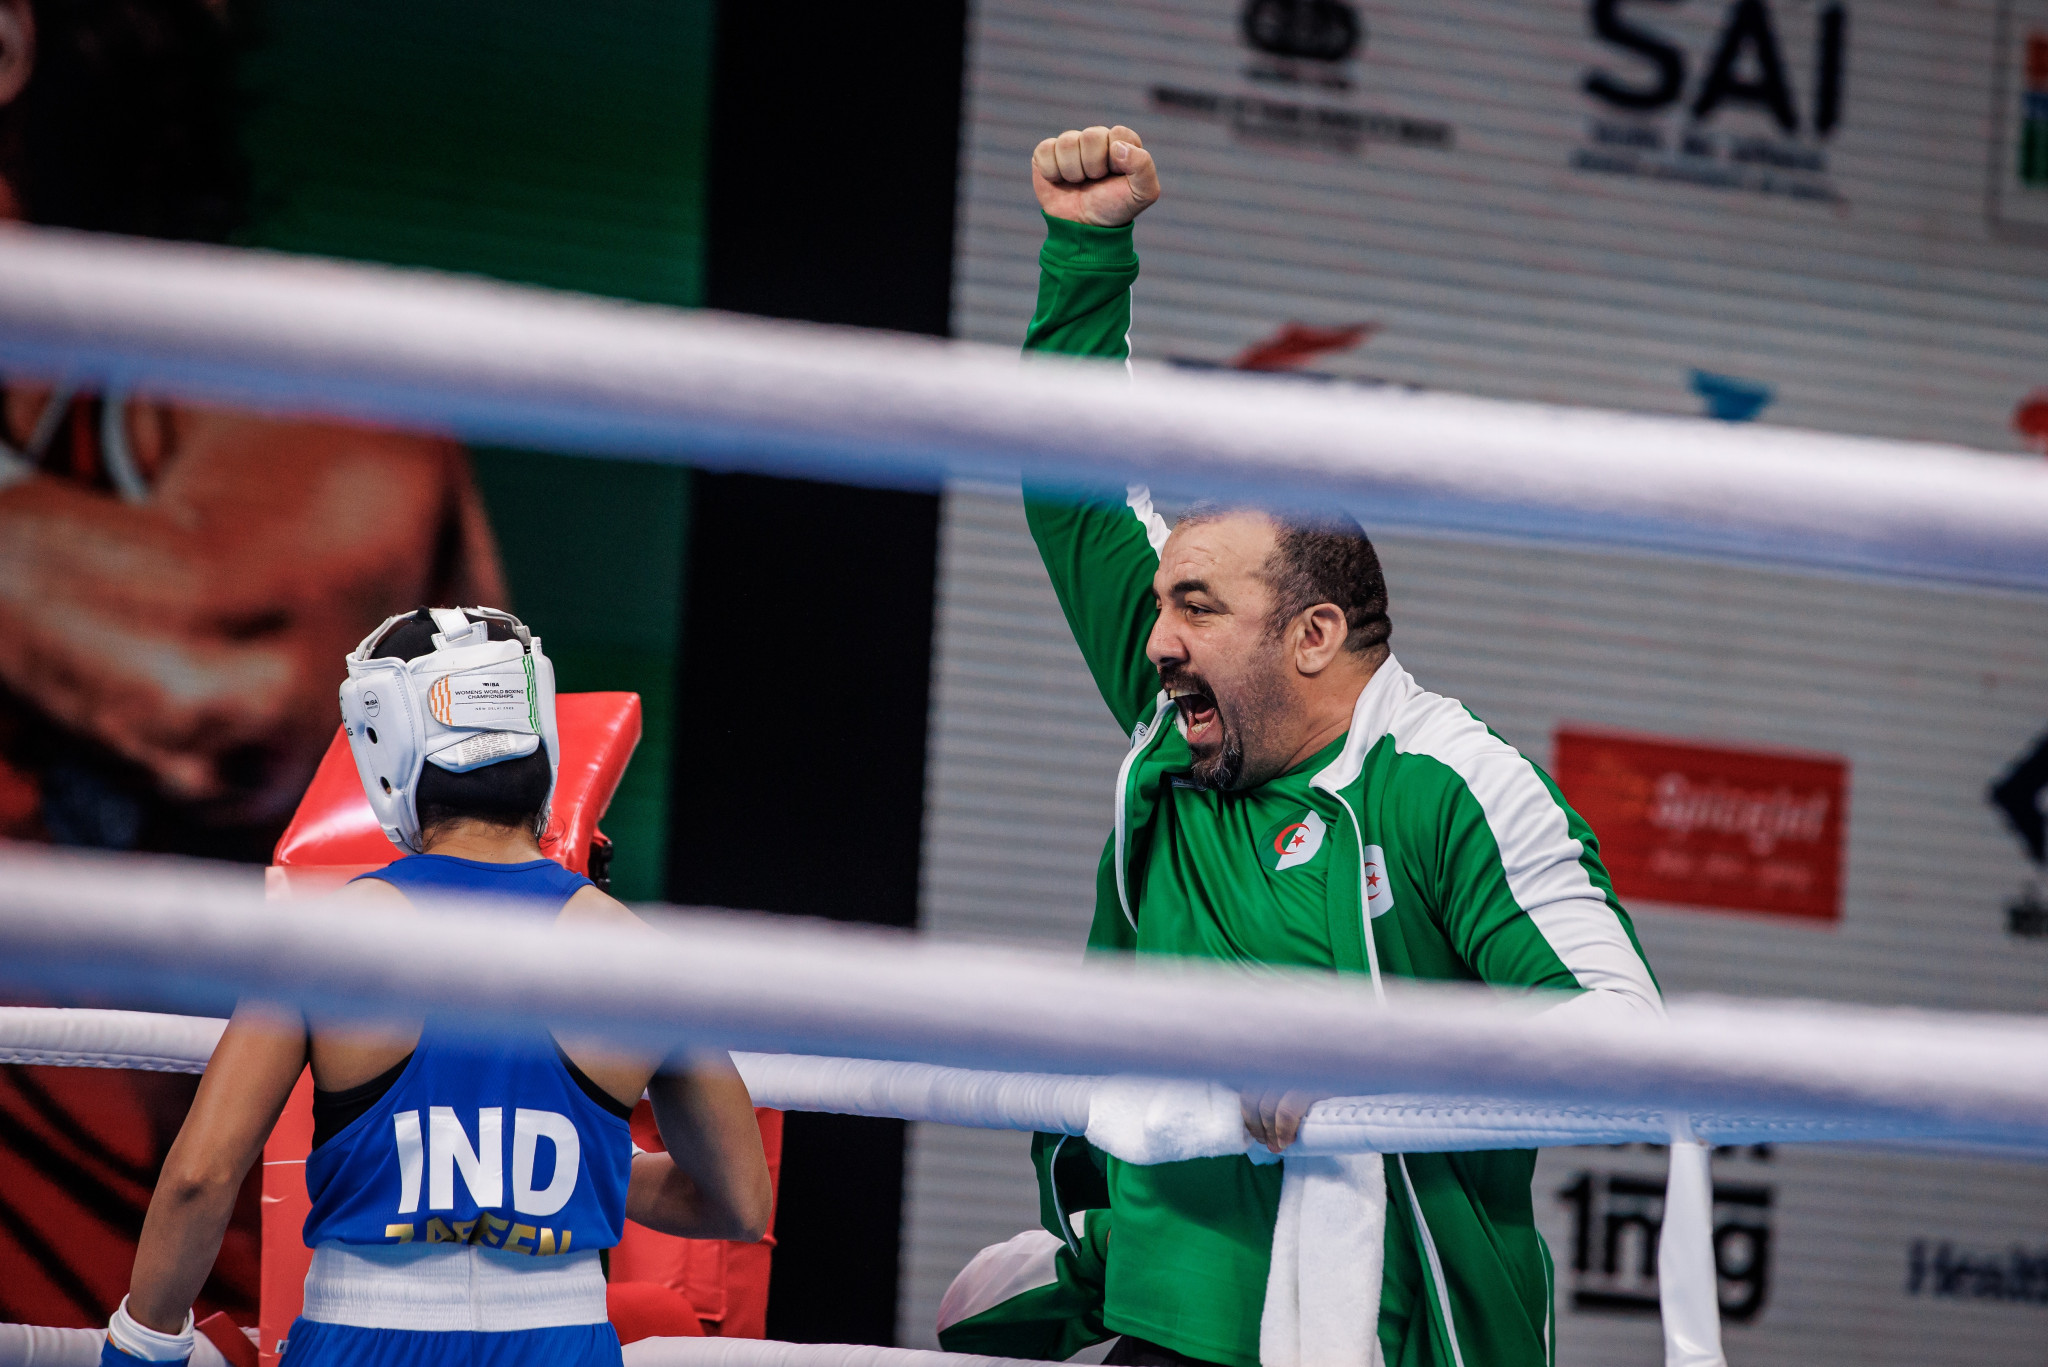 An Algerian coach celebrates at the end of the fight between Rousmaysa Boualam and India's Nikhat Zareen only to be left angered when the result did not go his way ©IBA